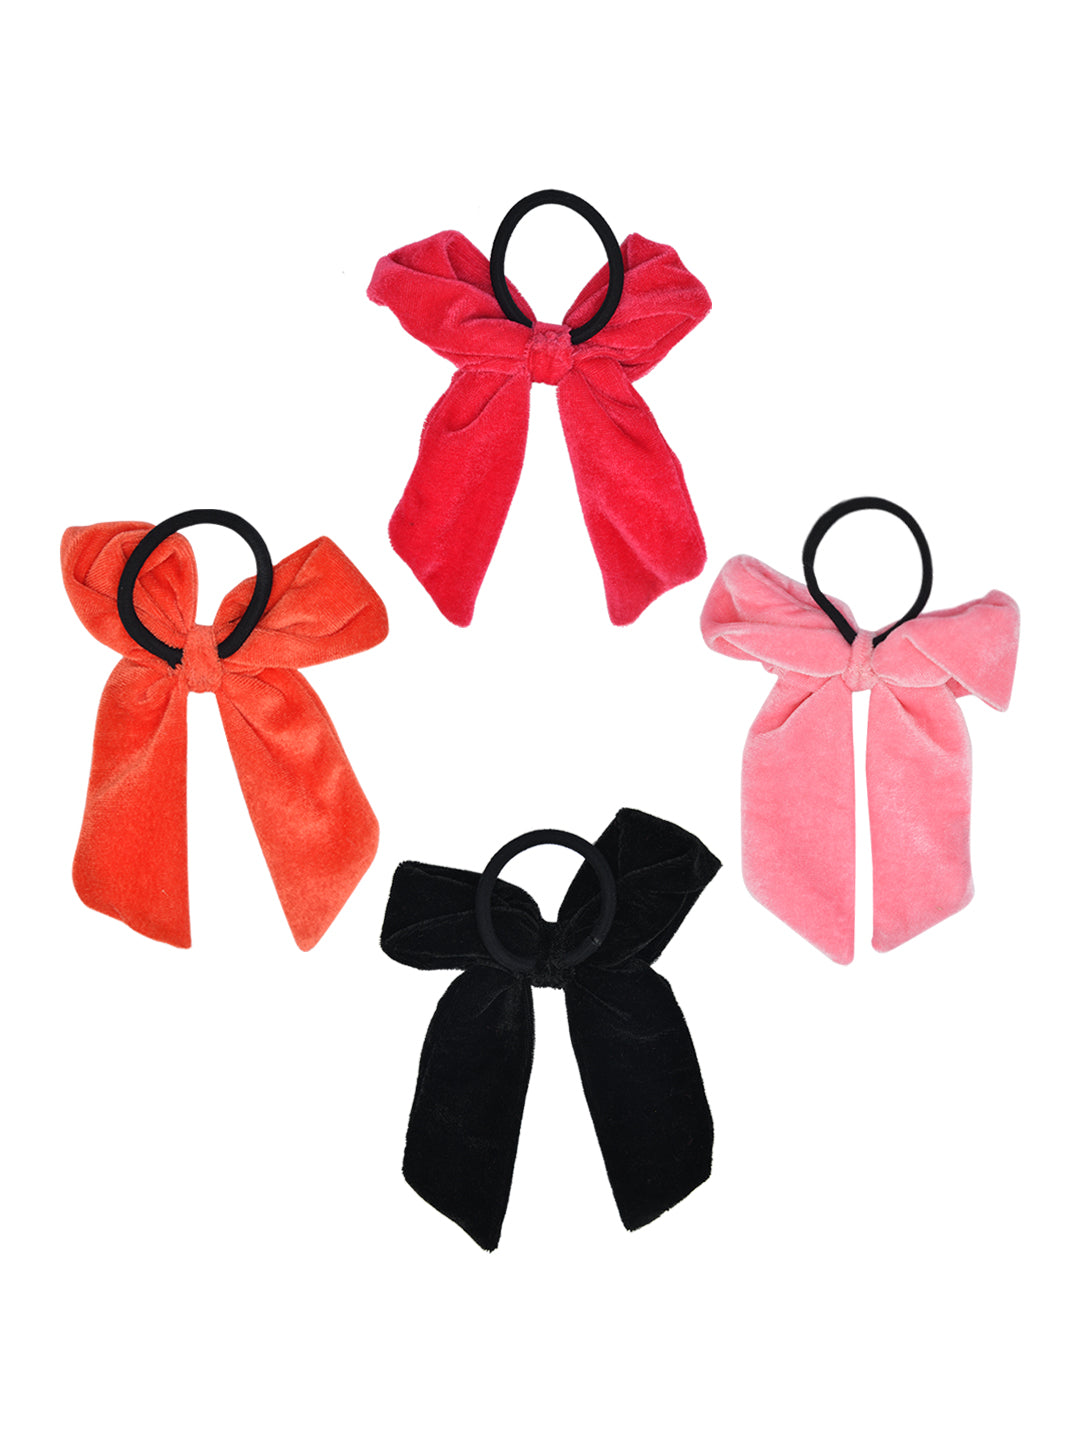 Set of 4 Multicolor Ribbon Style Hair Ties for Girls